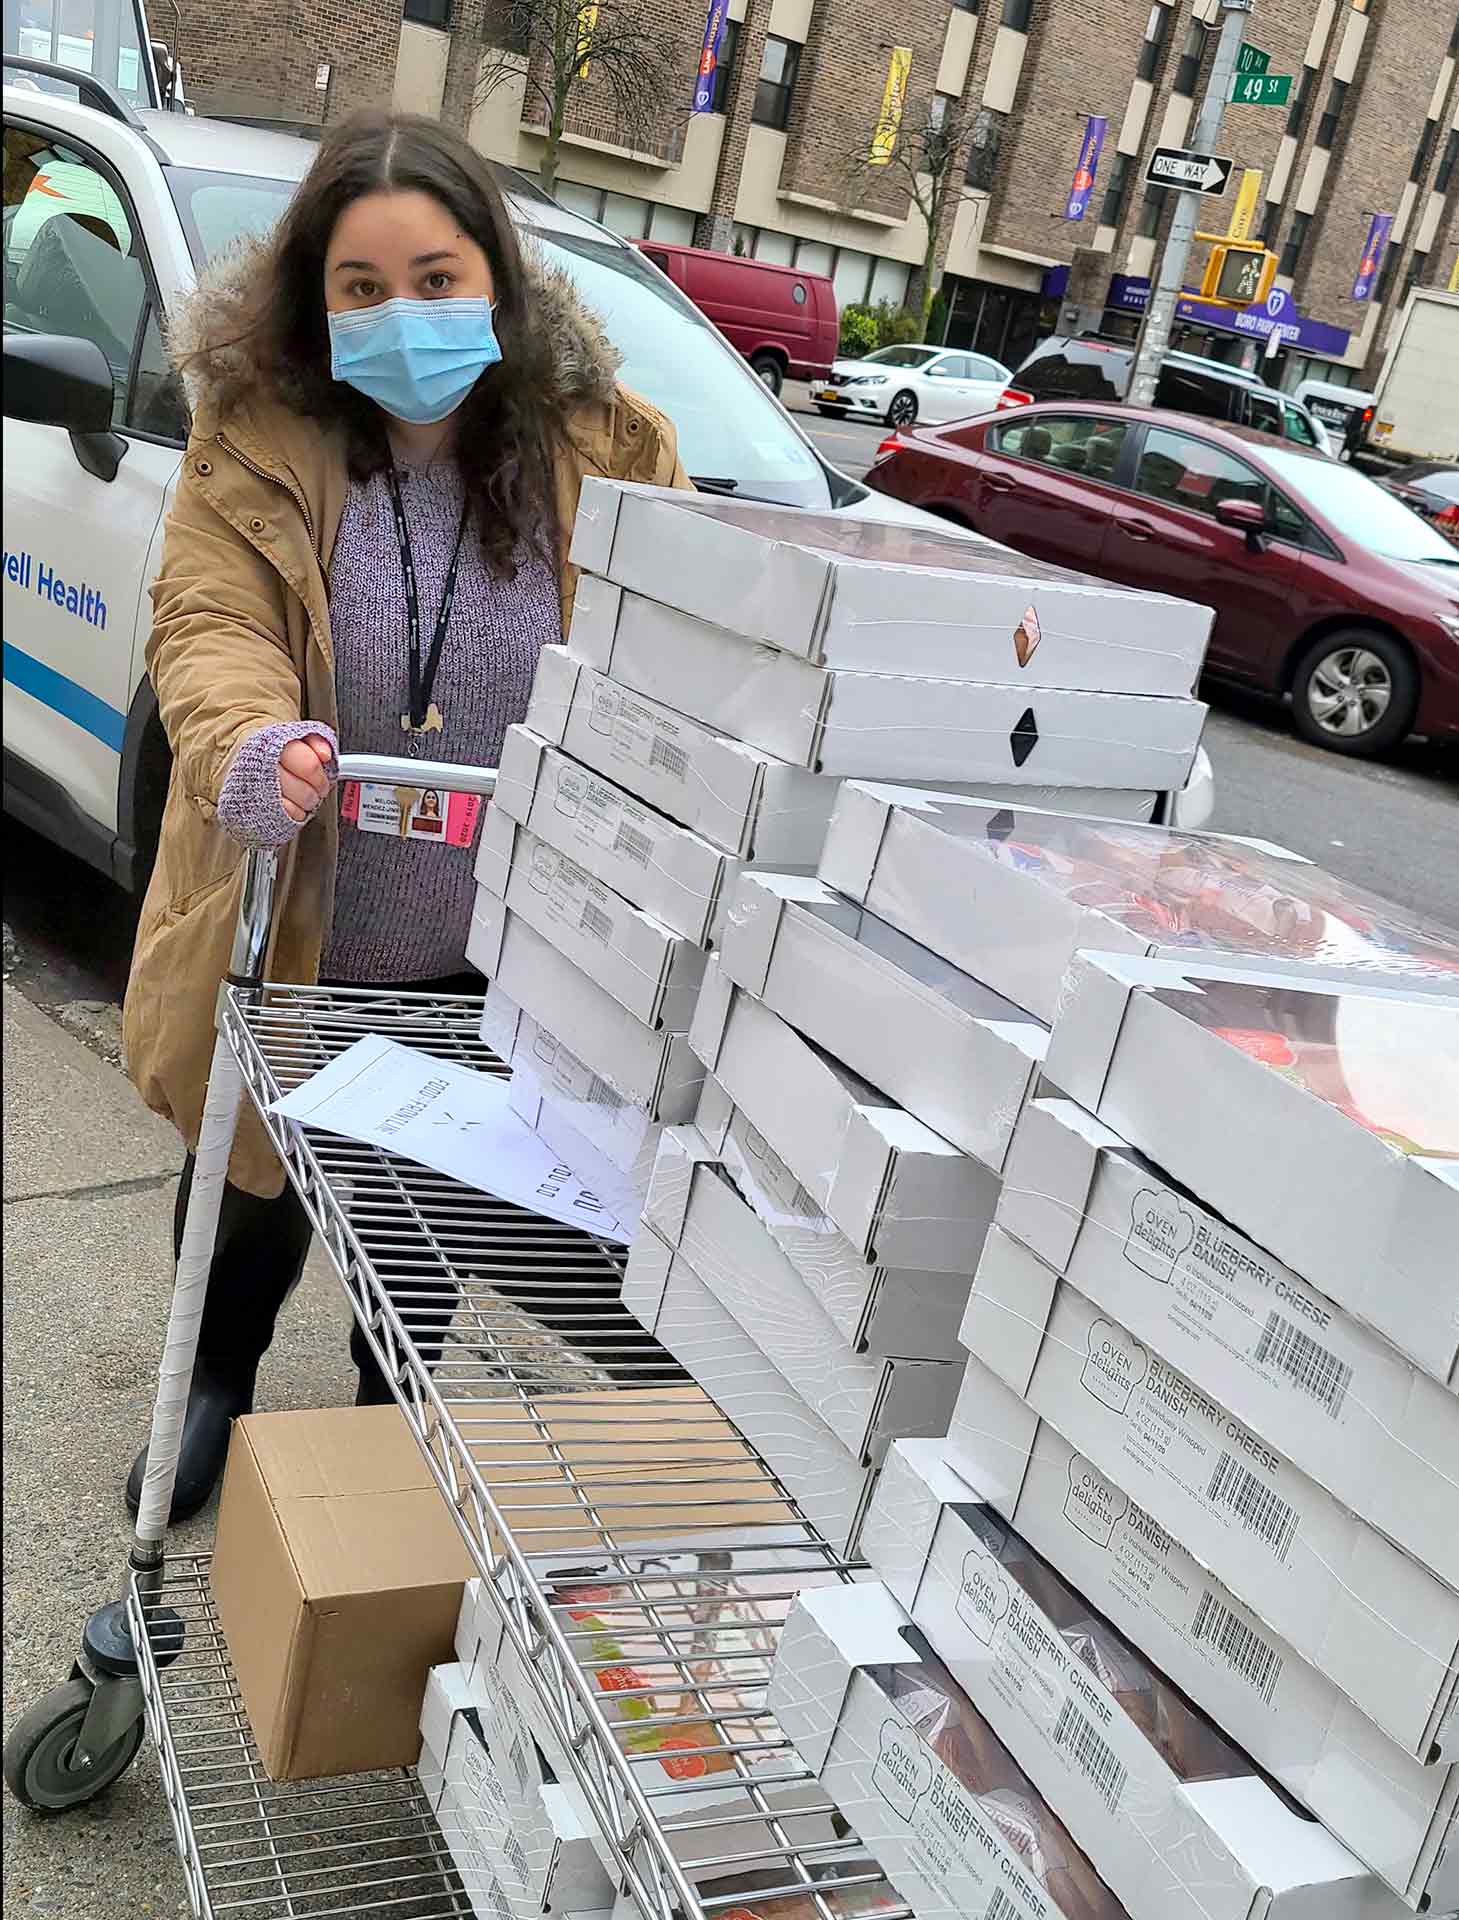 Woman wearing face mask delivers pastries